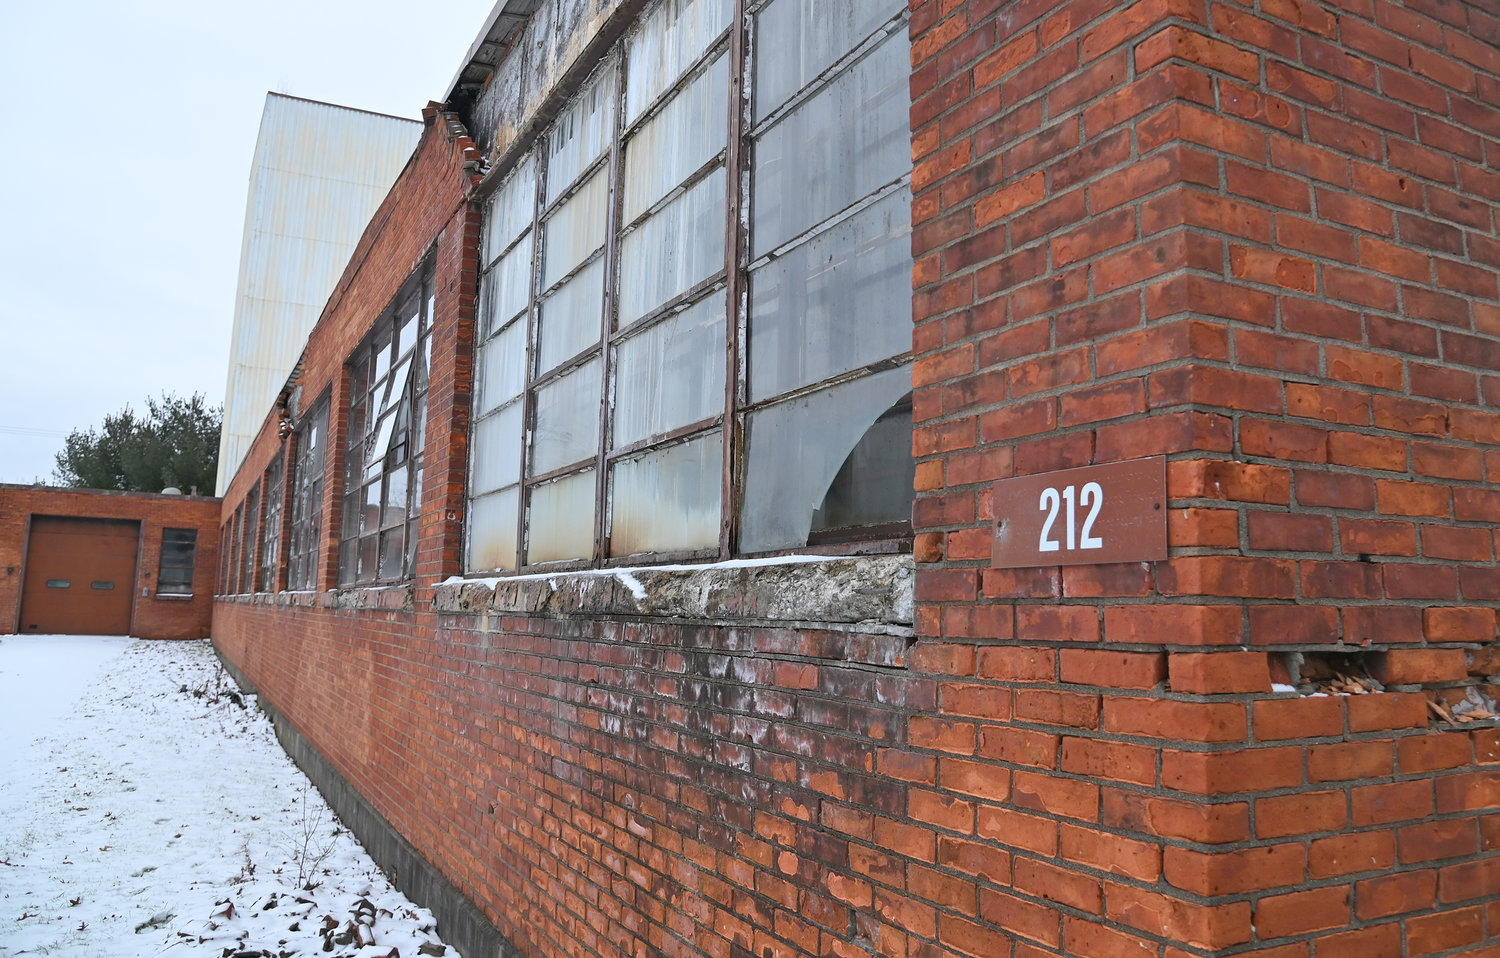 Building 212 at Griffiss Business and Technology Park. Site of the Parachute Brewery that will come to the park. Thursday, January 12, 2023.